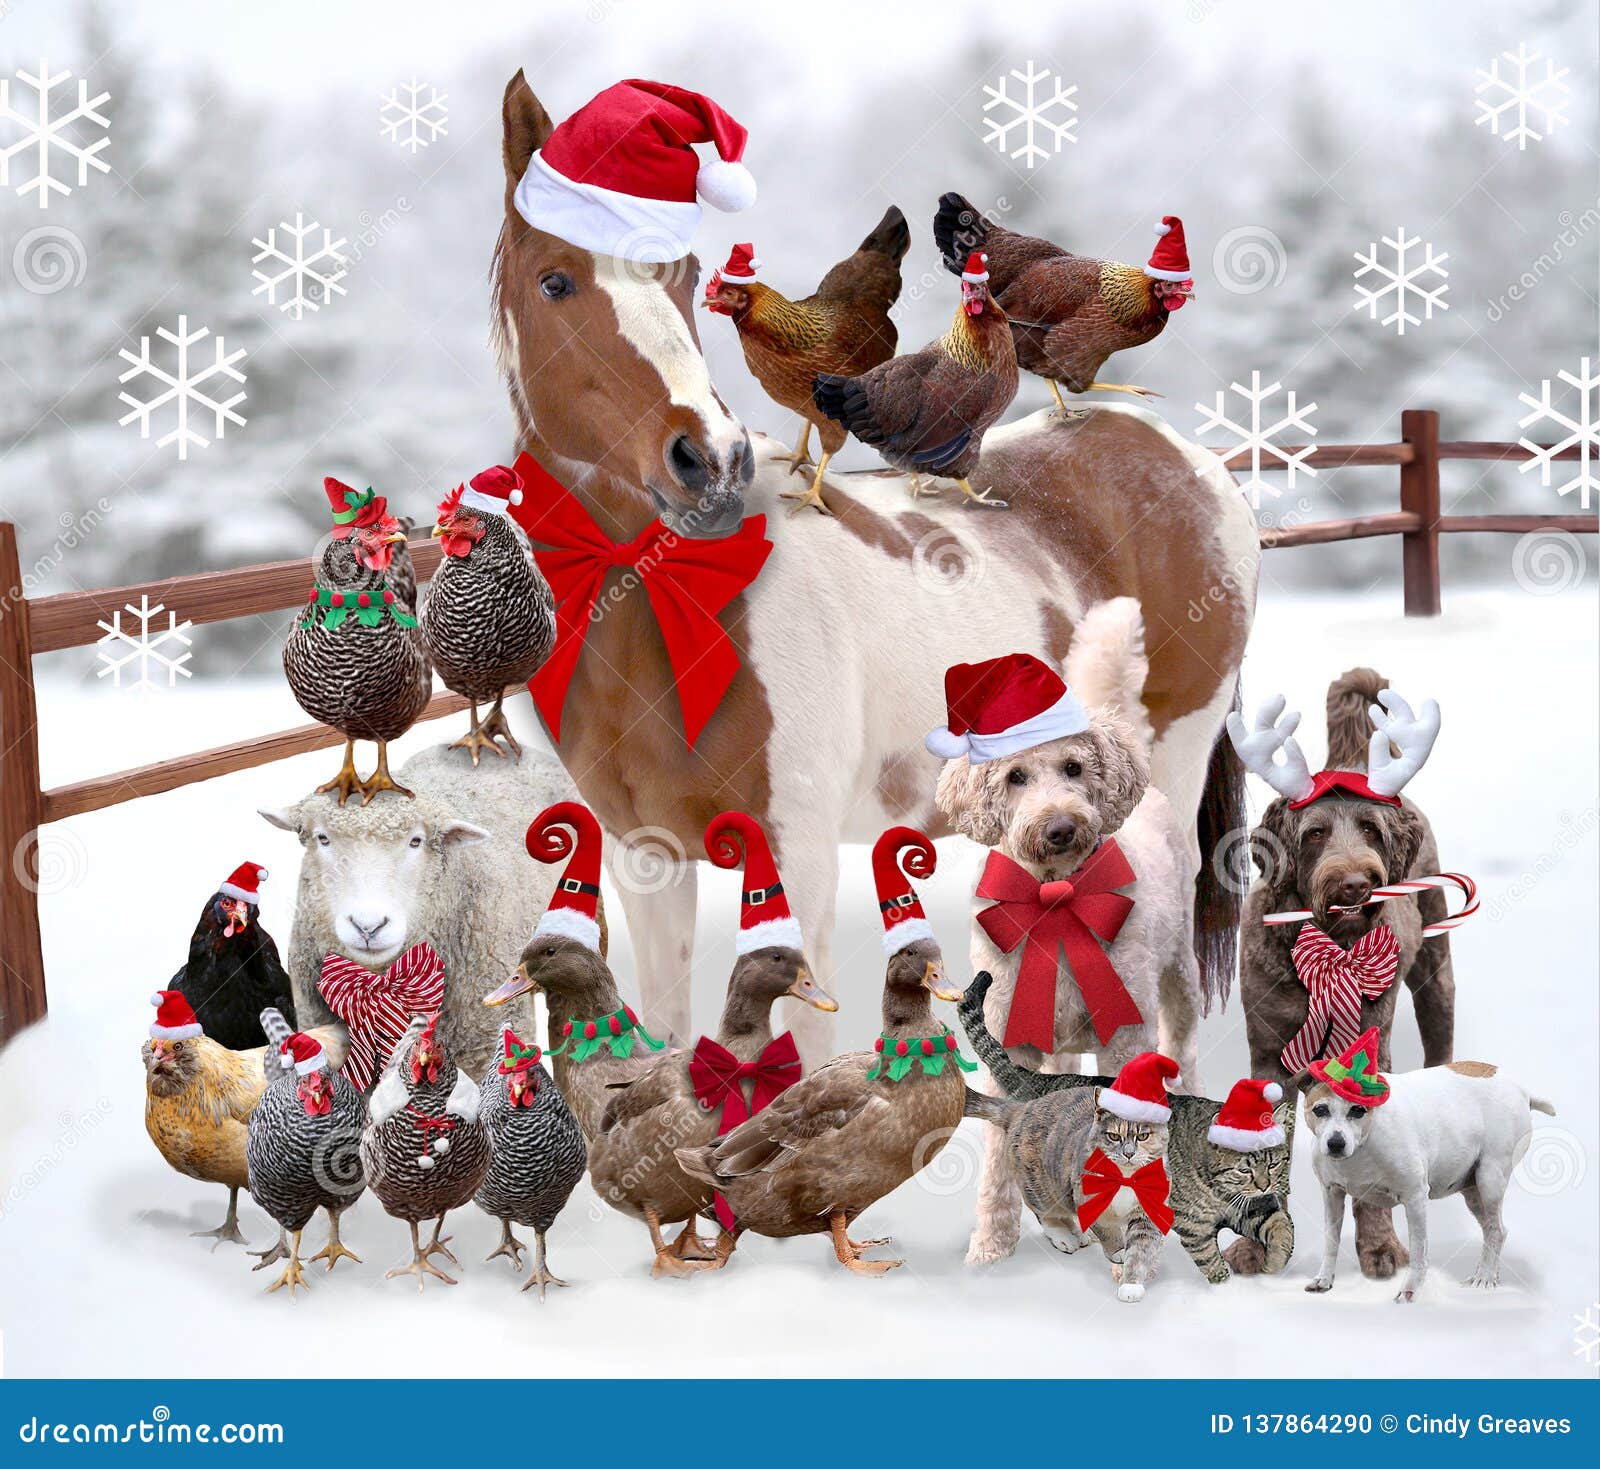 Farm Animals and Pets Standing Together Dressed for Christmas Stock Photo -  Image of animals, cedar: 137864290